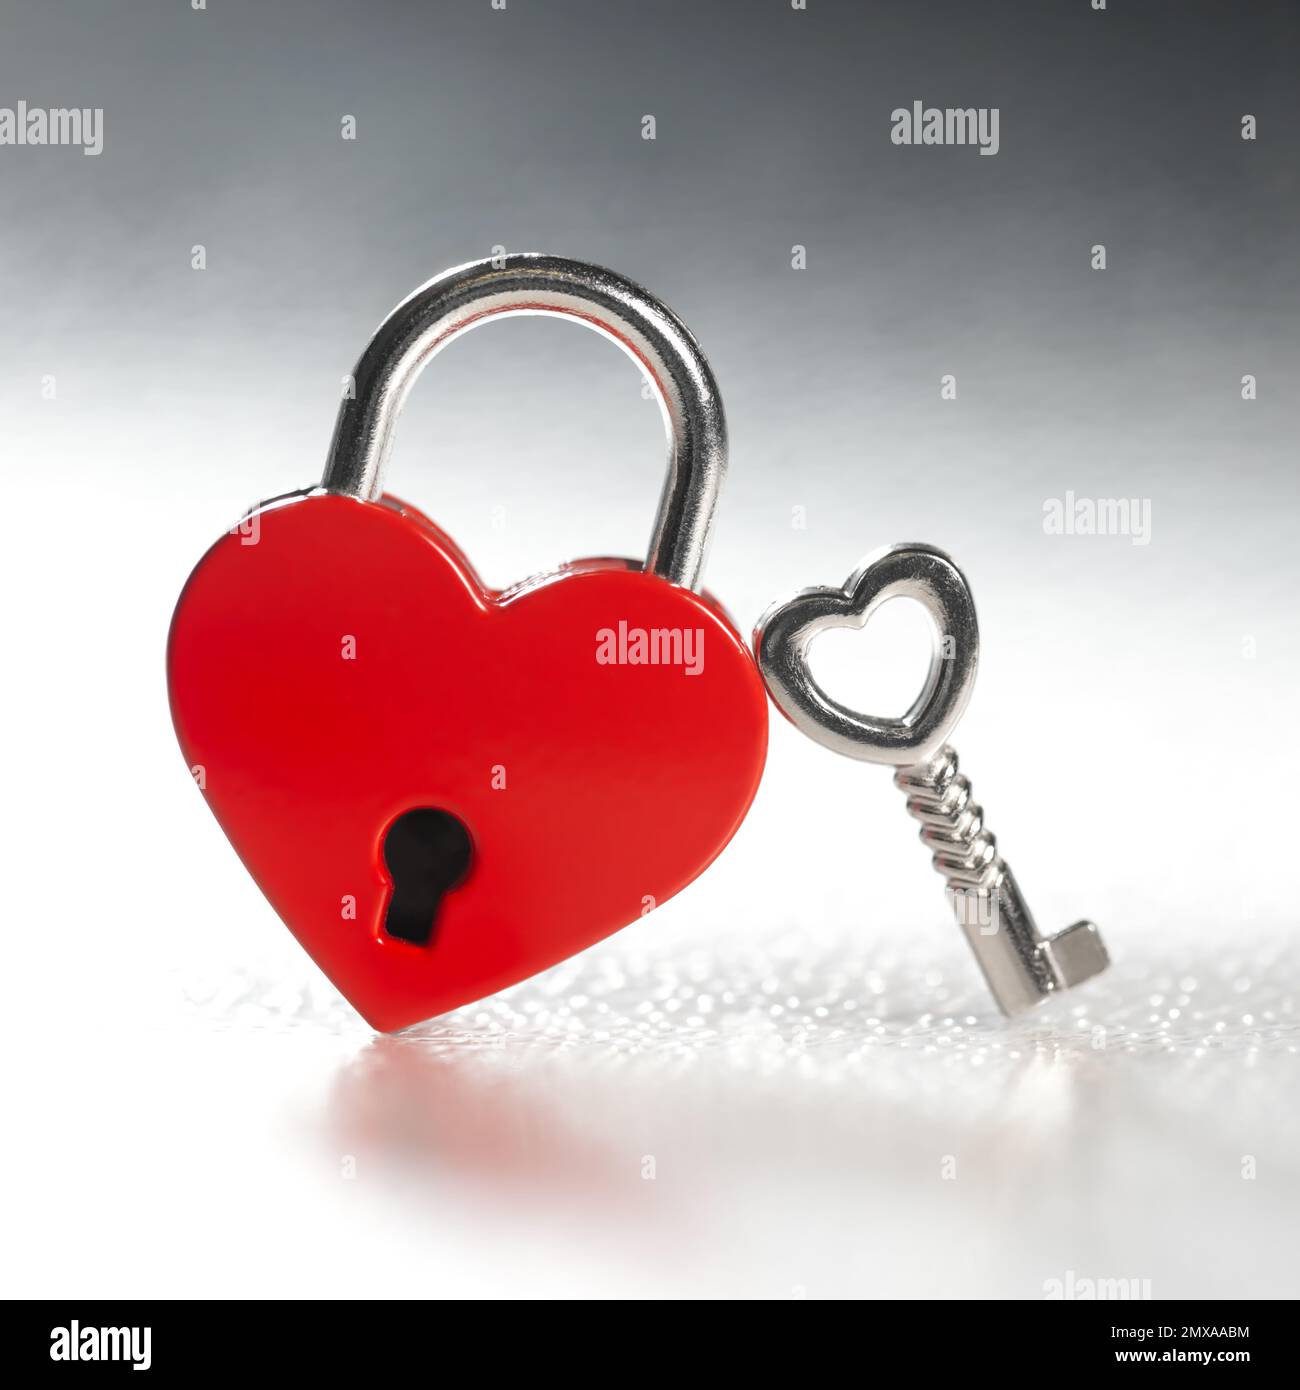 Lock in the shape of a red heart with small key. Love in wedlock, marriage, or Valentine's Day concept. Stock Photo